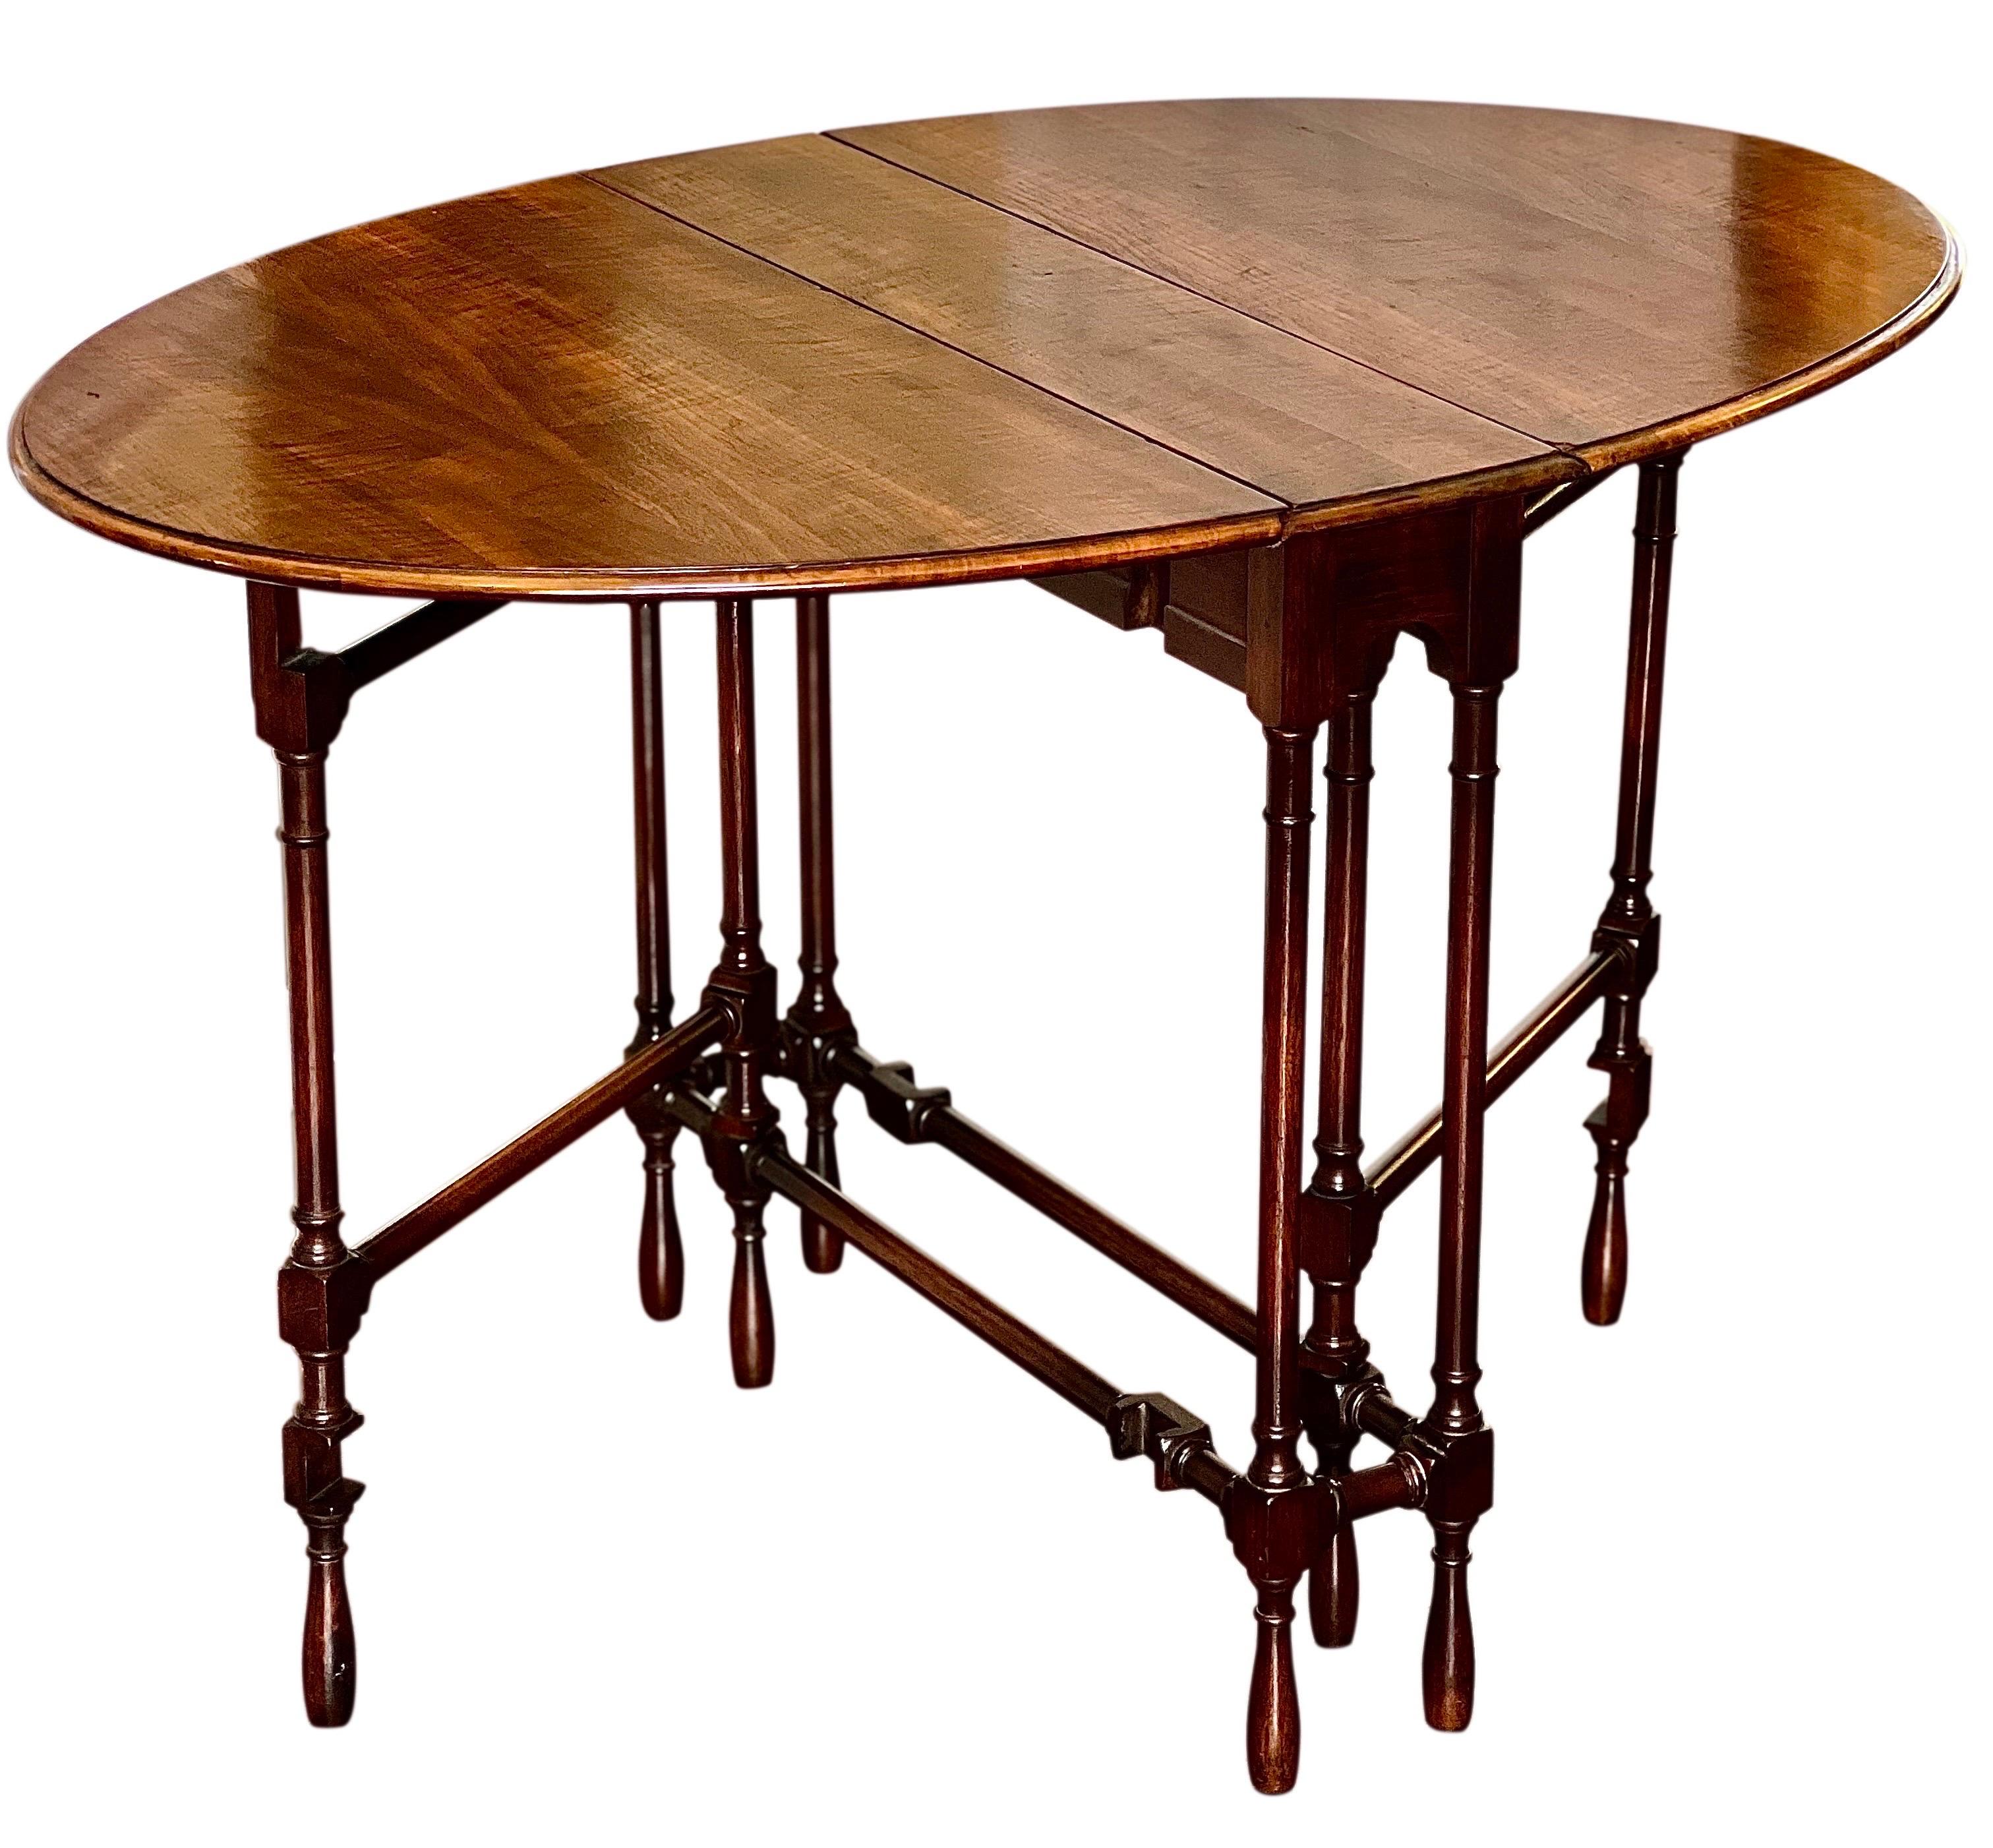 Antique English oak gate leg table, c. 1910’s.

Exceptional Jacobean style table in tiger oak with a uniquely slim profile. It features notably long leaves which extend to provide an amply sized tabletop of 40.75